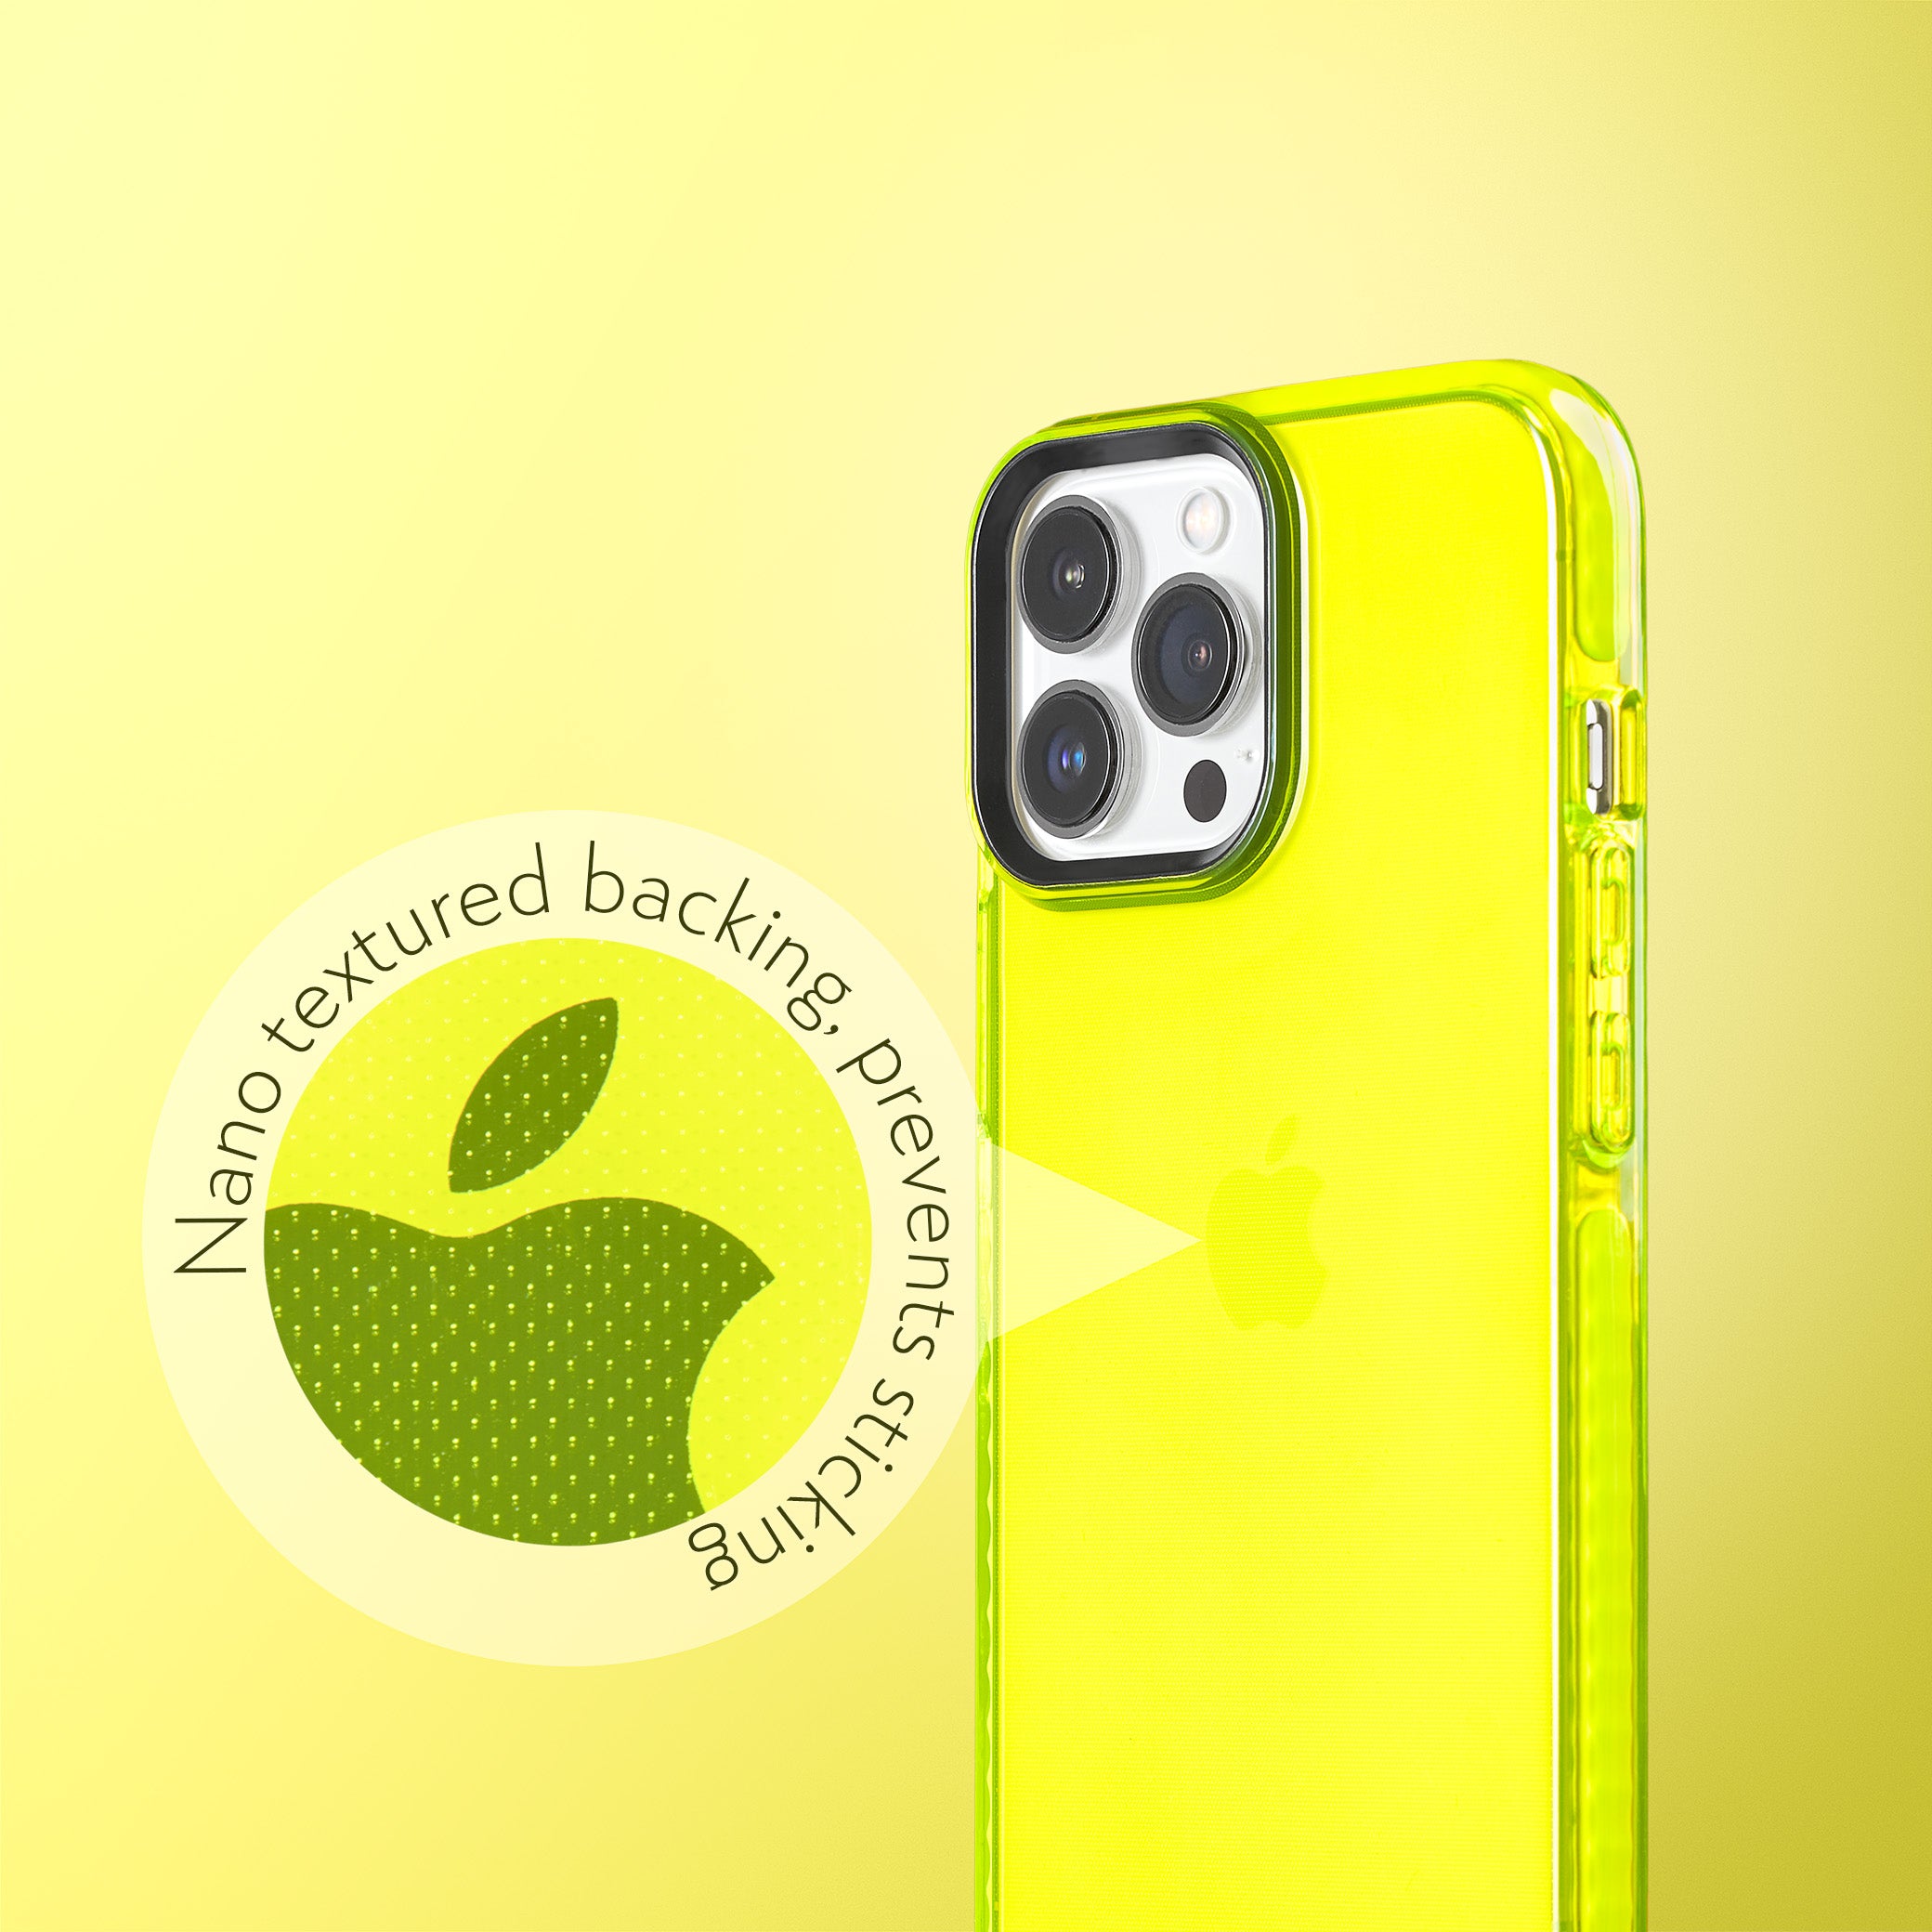 Highlighter Case for iPhone 13 Pro Max - Conspicuous Neon Yellow